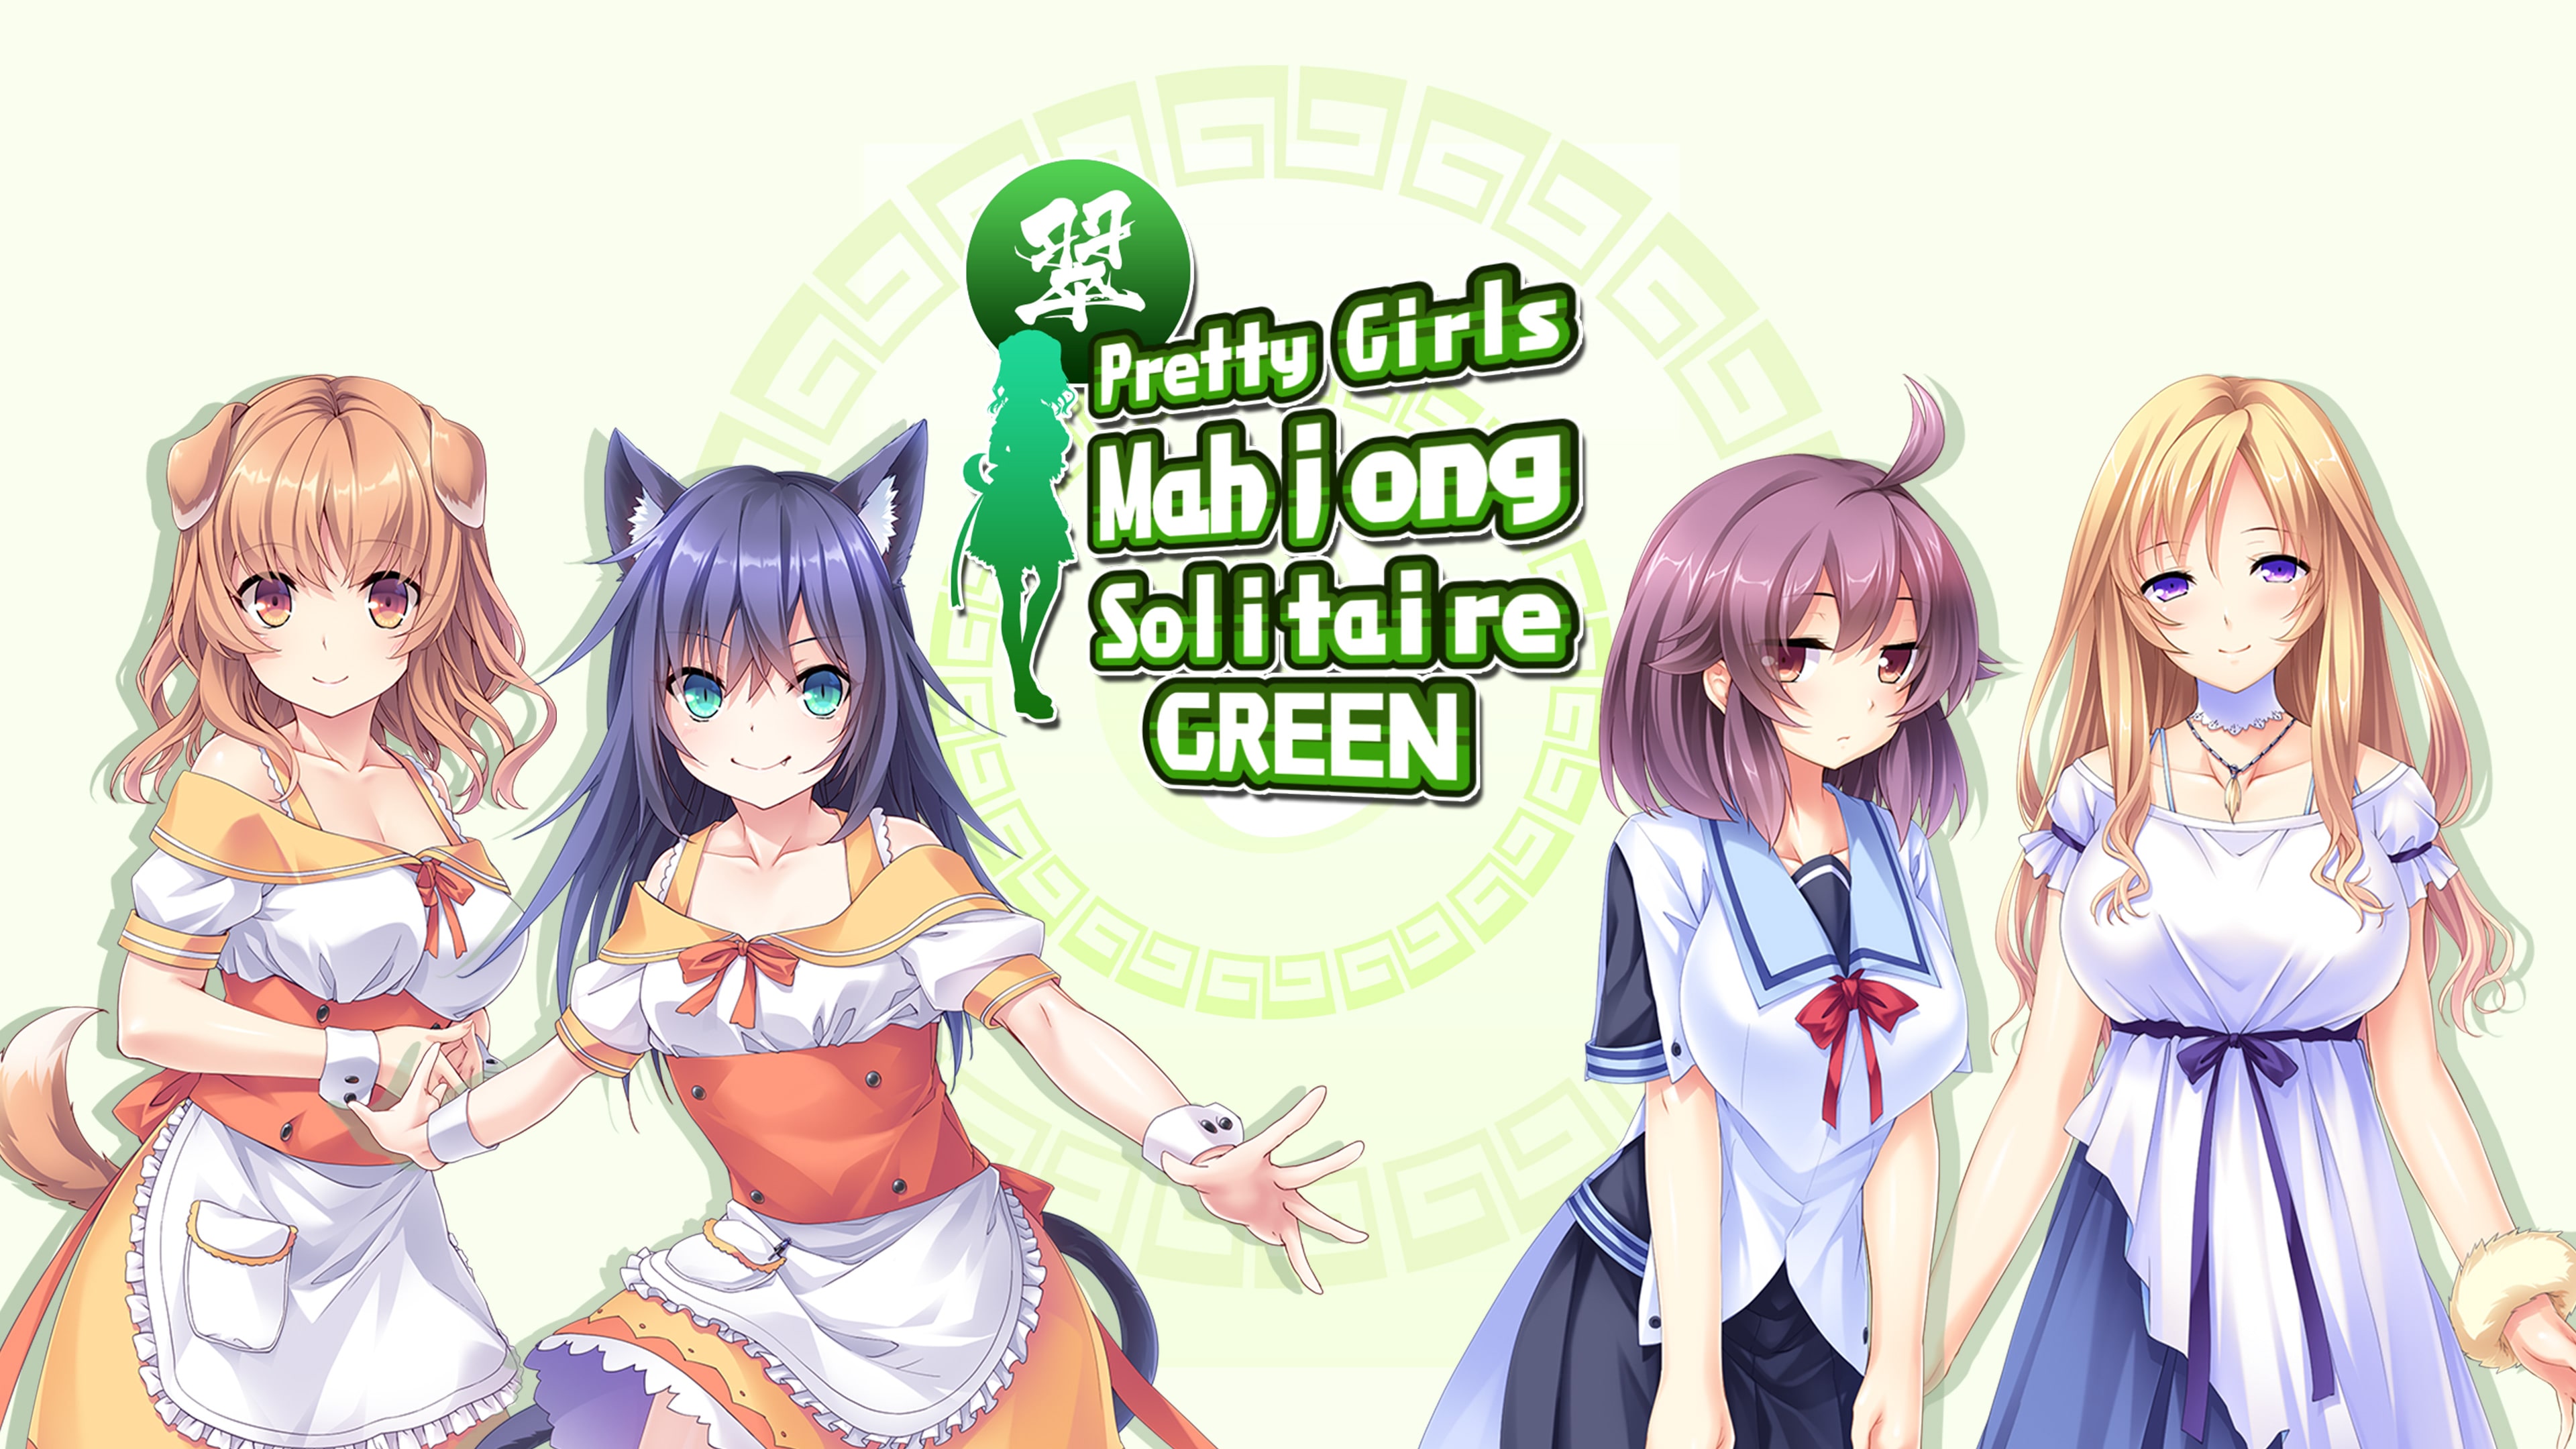 Pretty Girls Mahjong Solitaire - Green PS4 & PS5